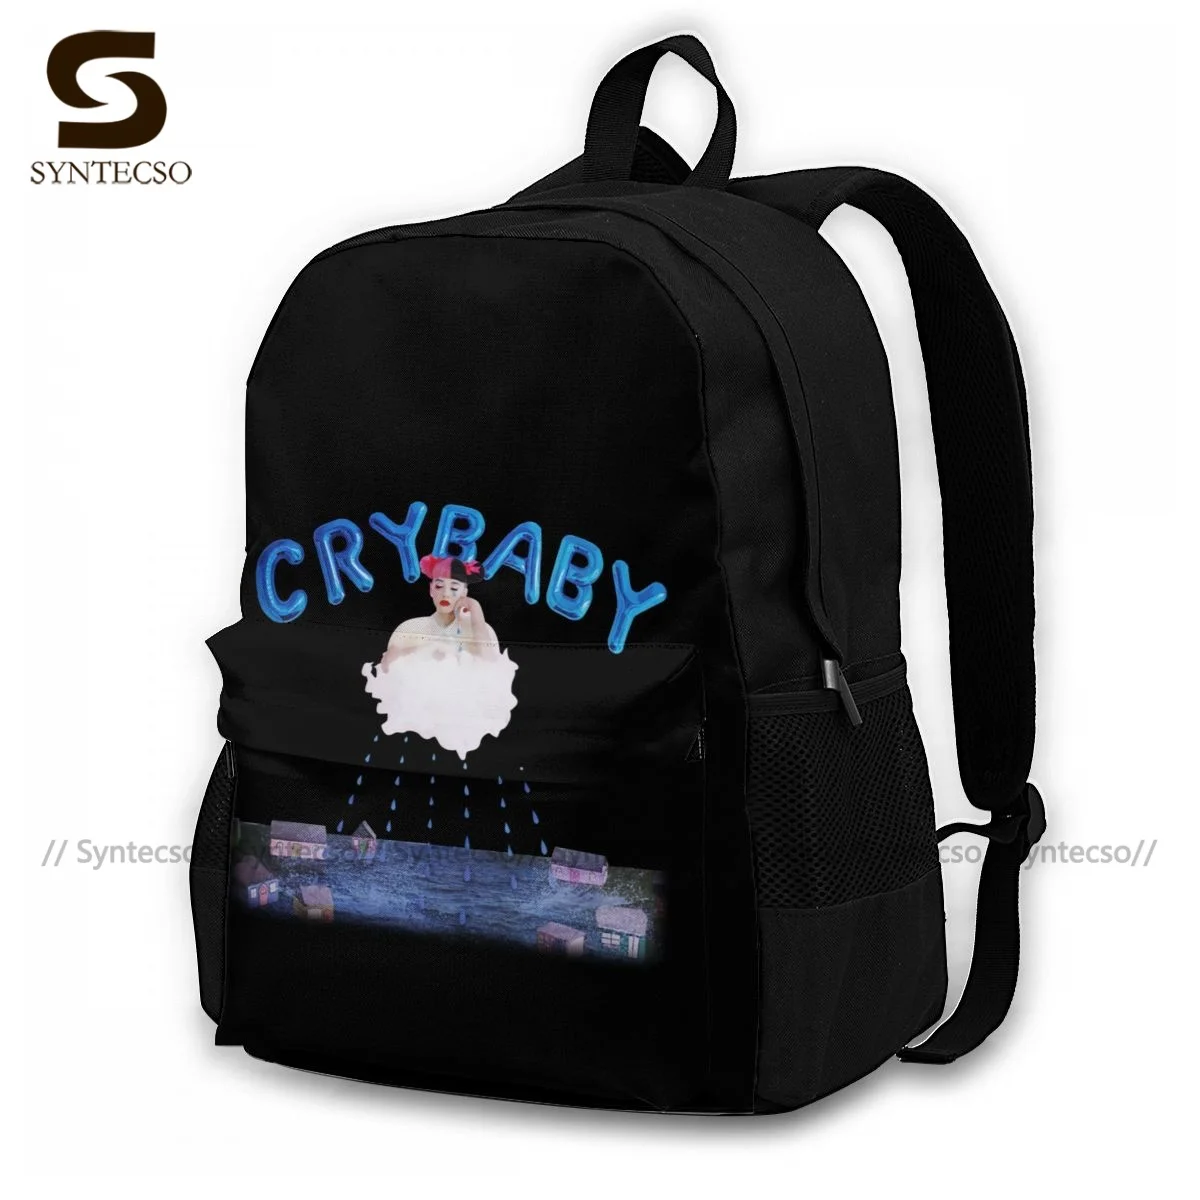 Melanie Martinez Backpacks Cry Baby Soft Crybaby Cool Polyester Backpack Commuter Runner School Bags for Women Men